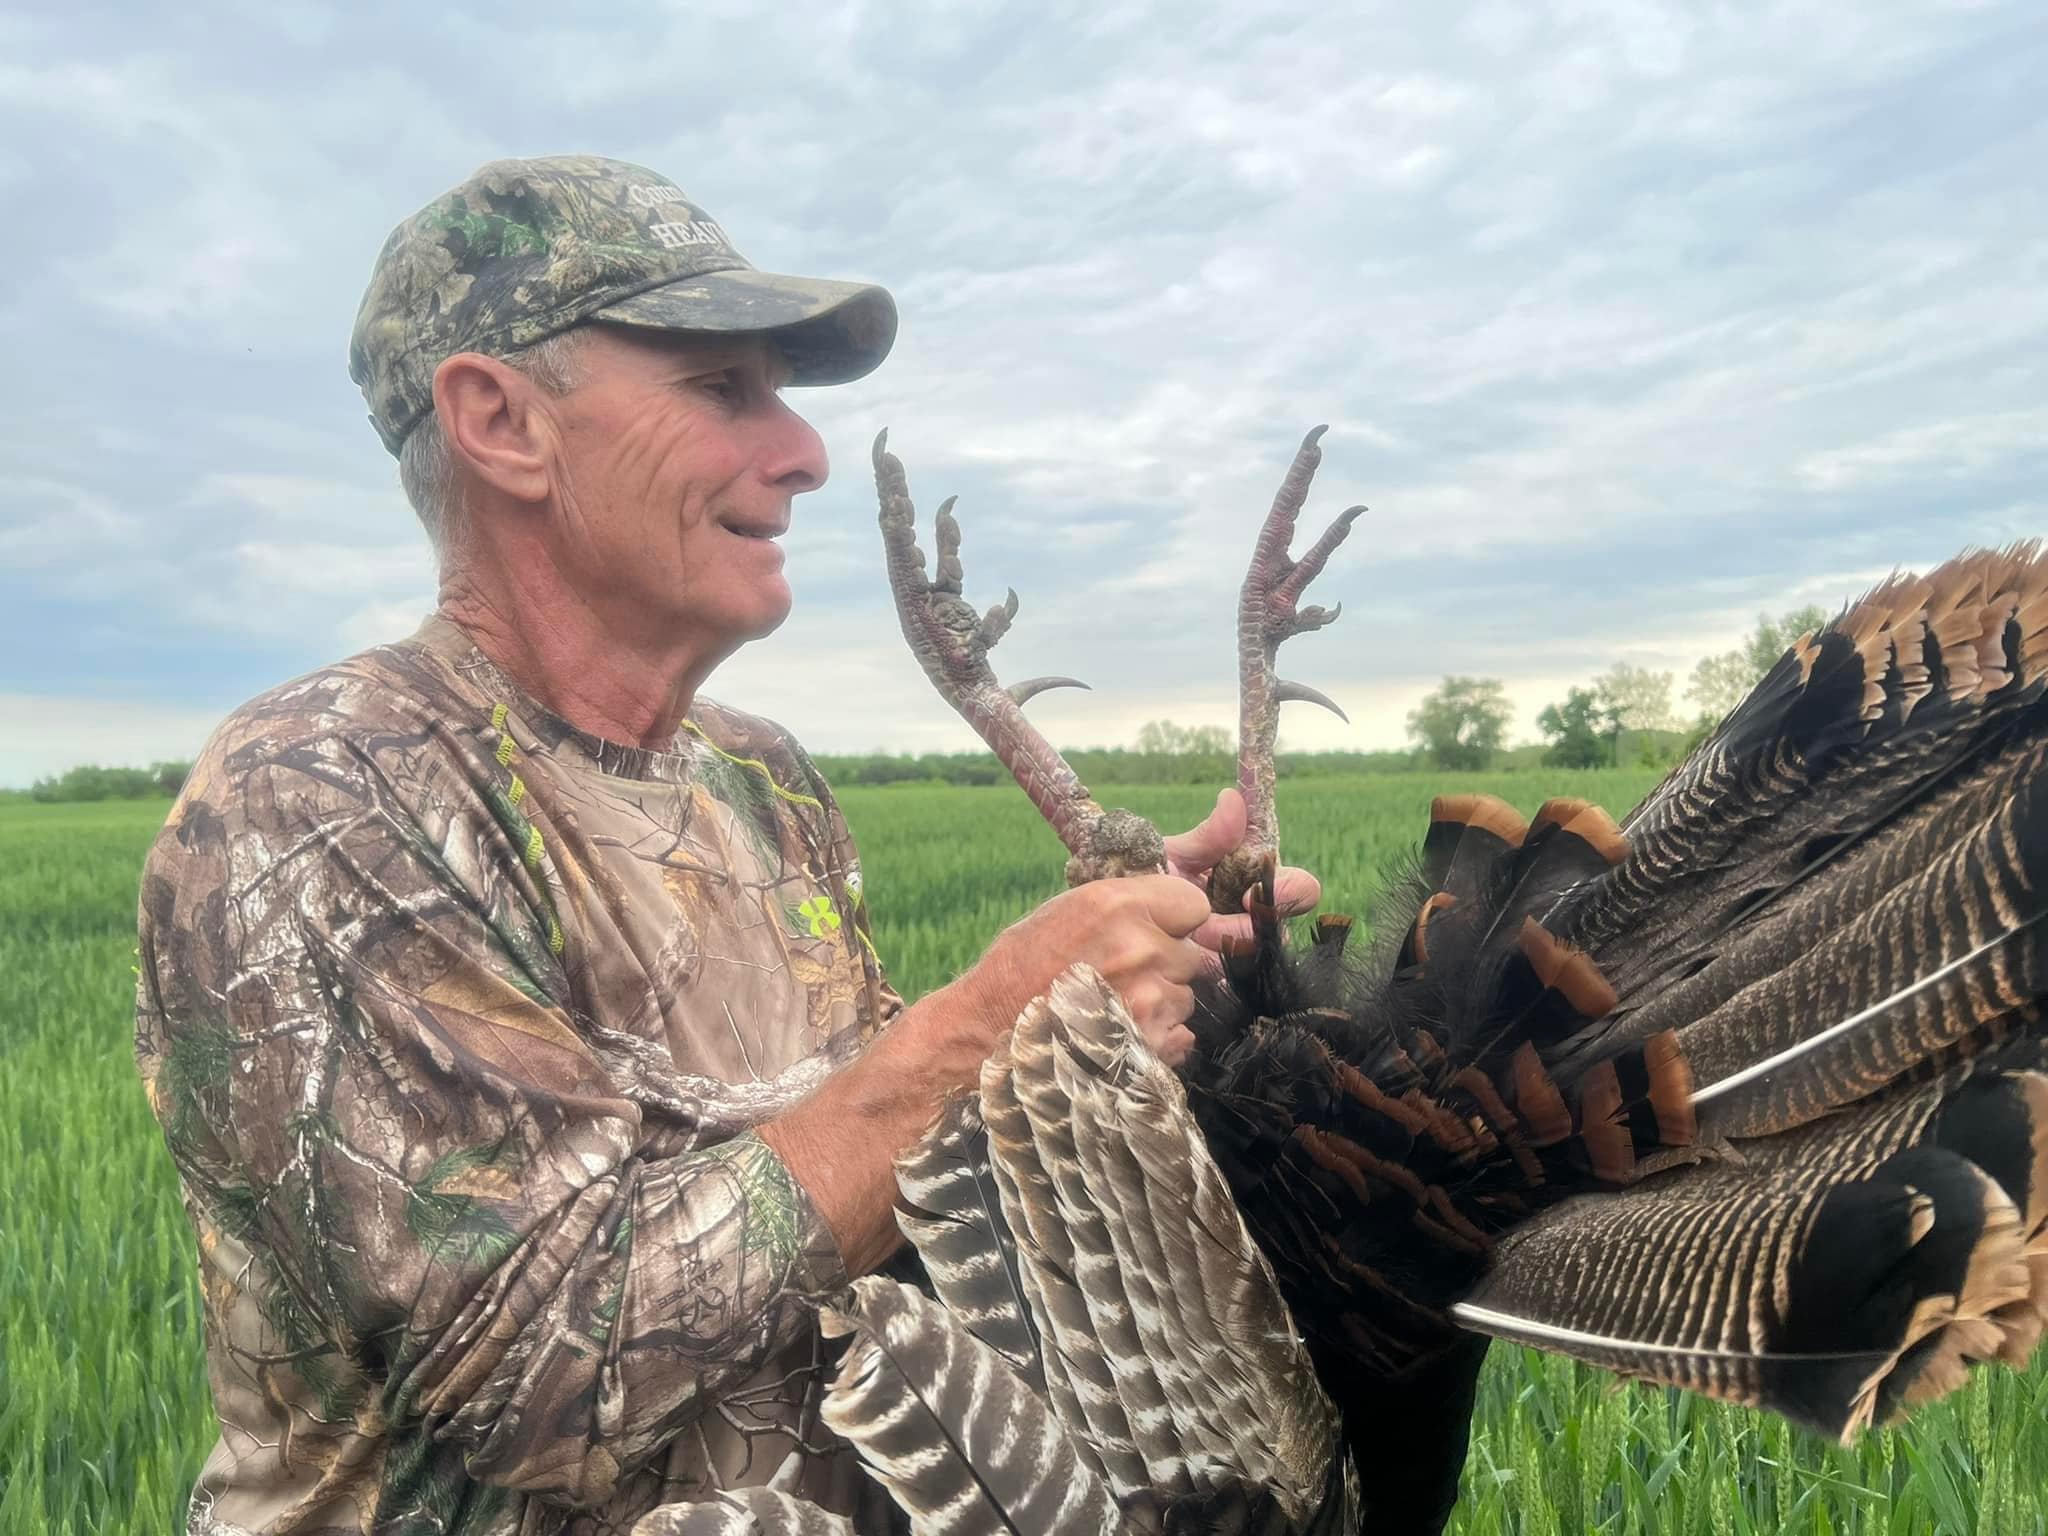 Harry Daley checks out the gobbler's impressive spurs.